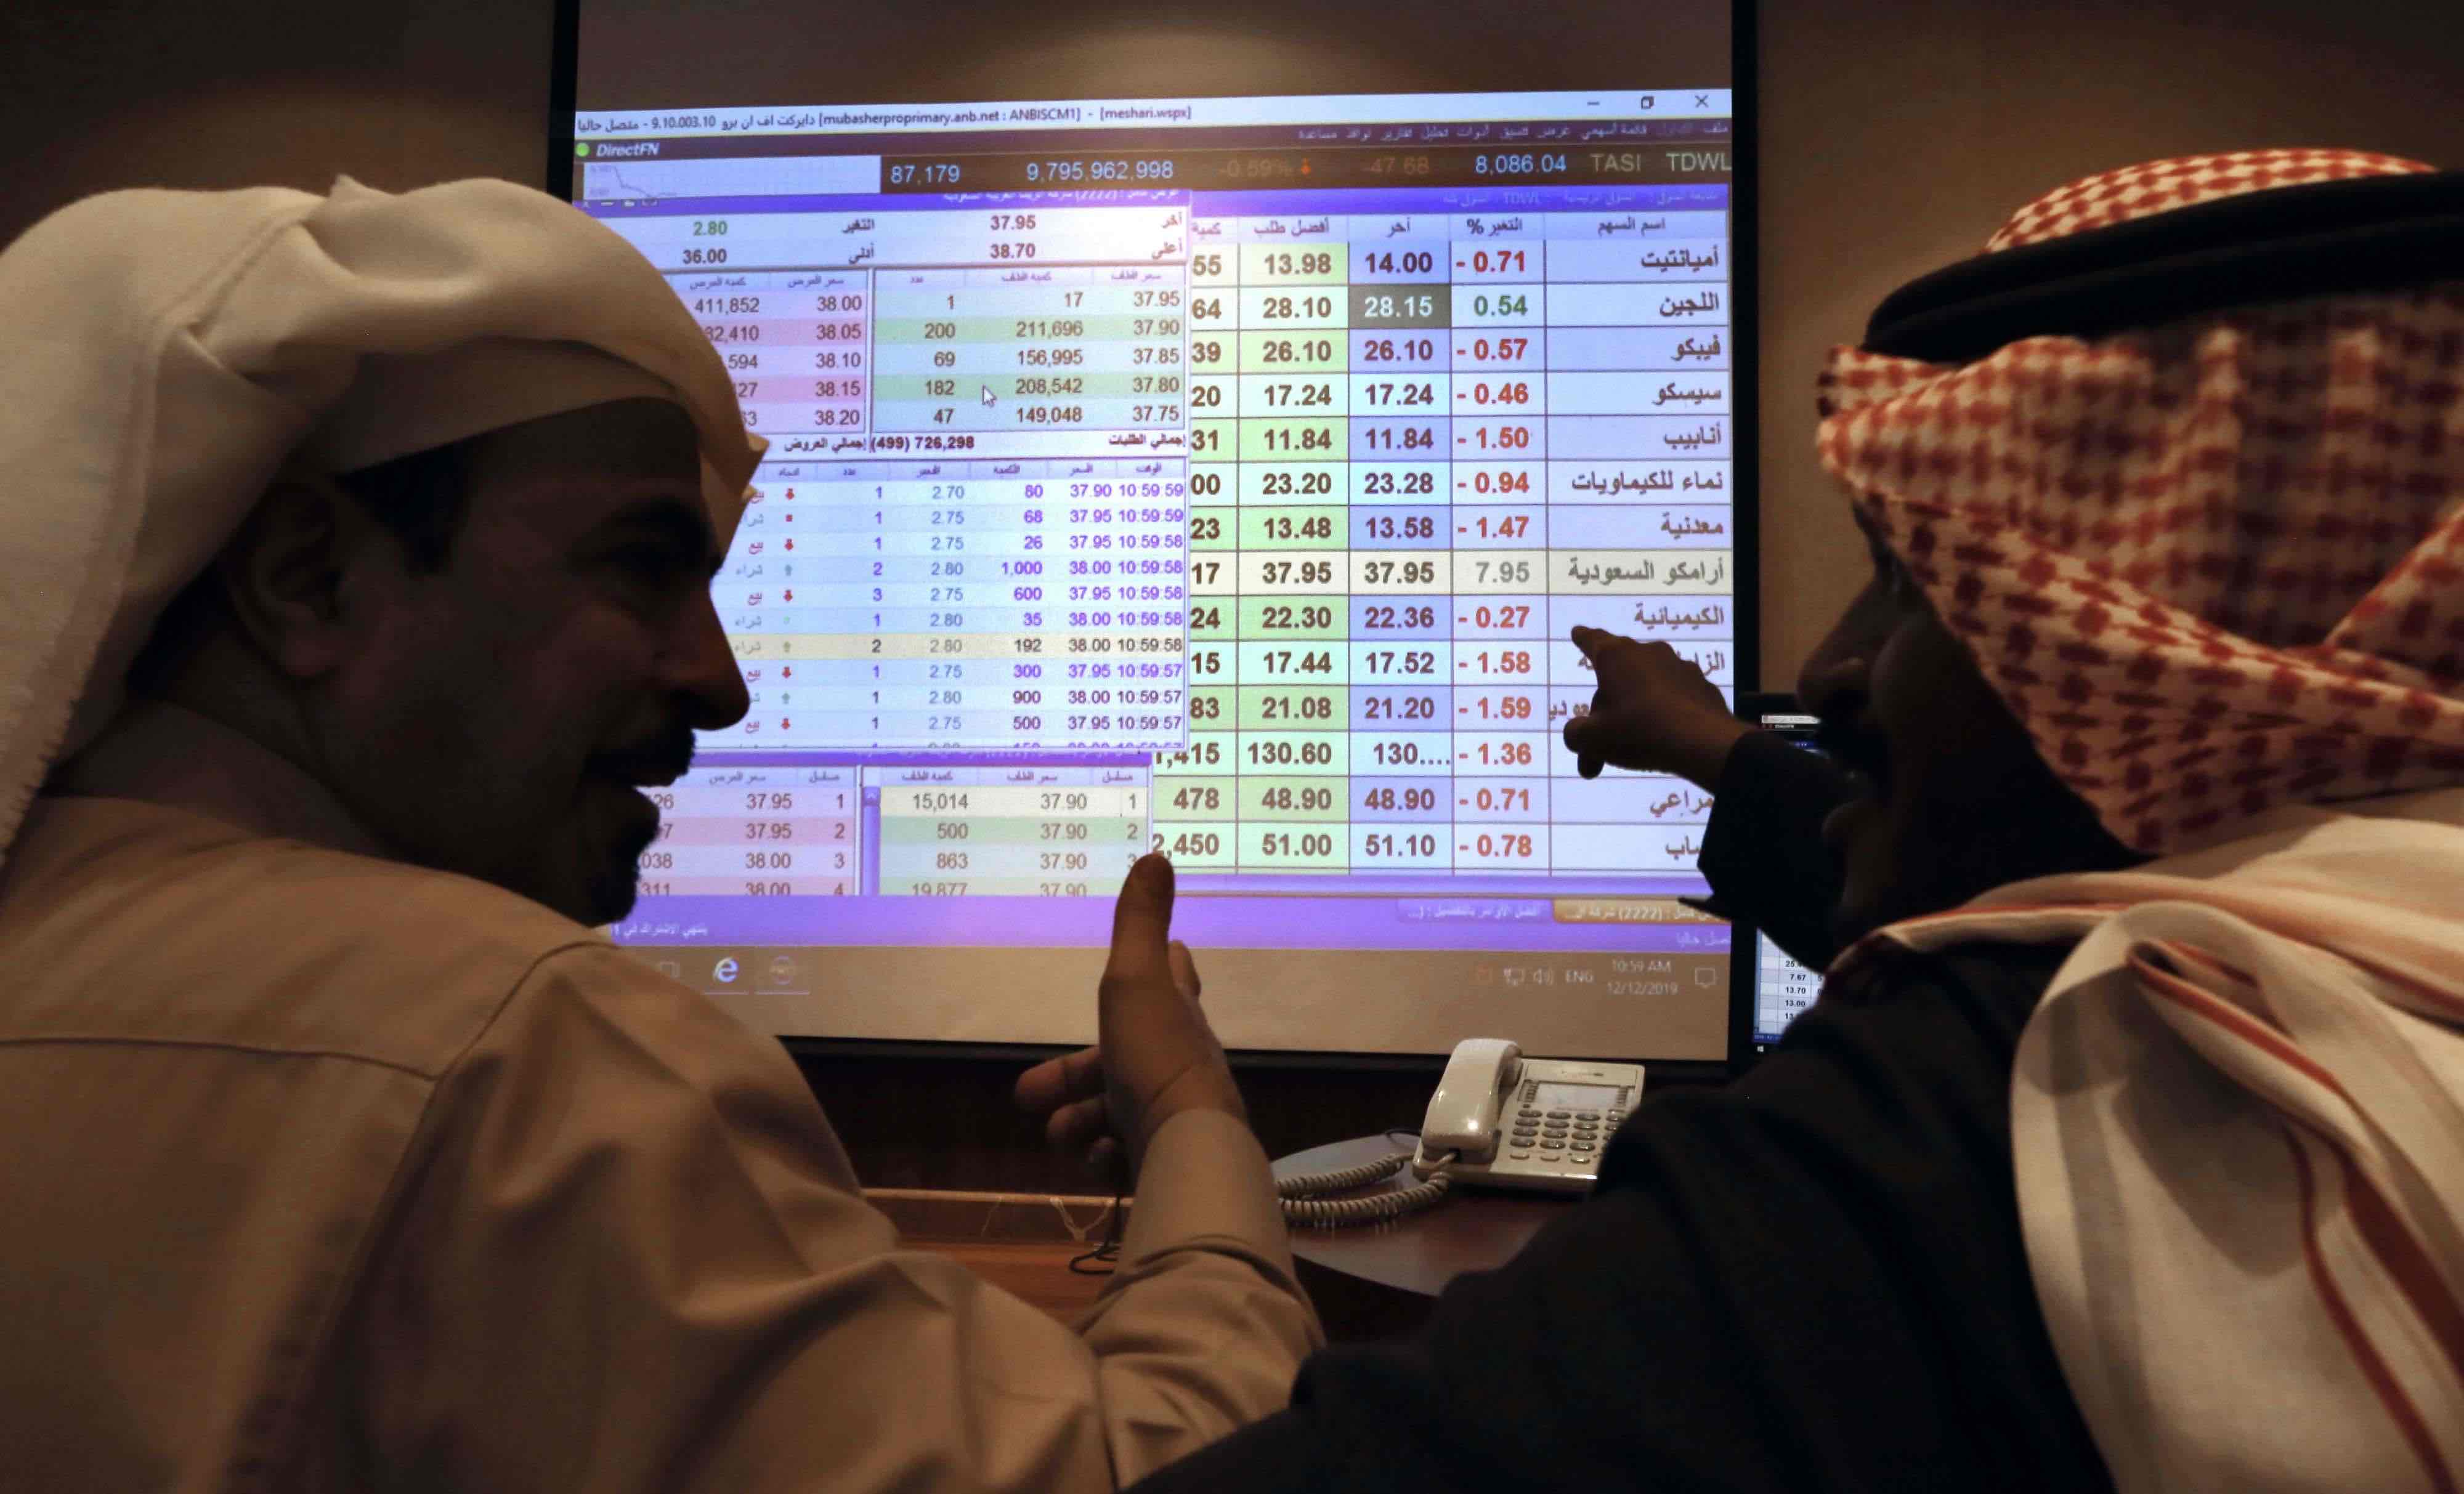 Saudi Arabia's Tadawul market, the largest in the region and one of the world's top 10, was trading 2.4 percent down